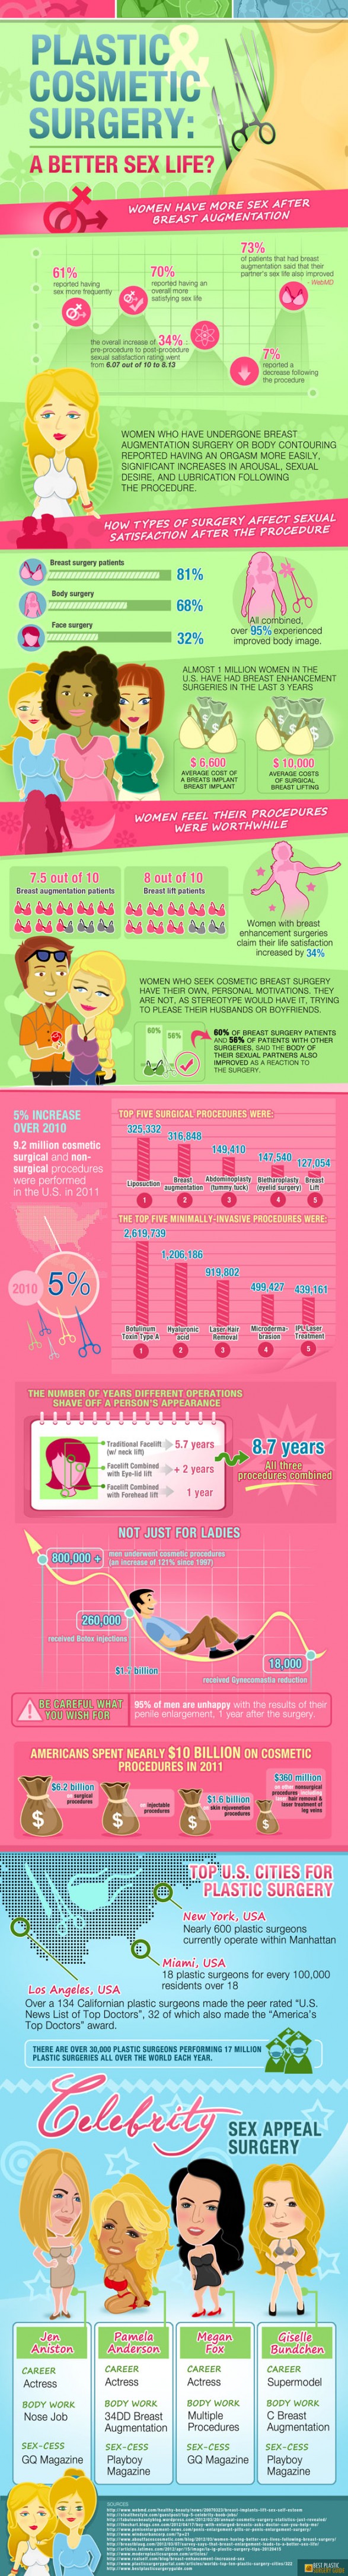 More-Sex-After-Breast-Augmentation-For-Women-infographic